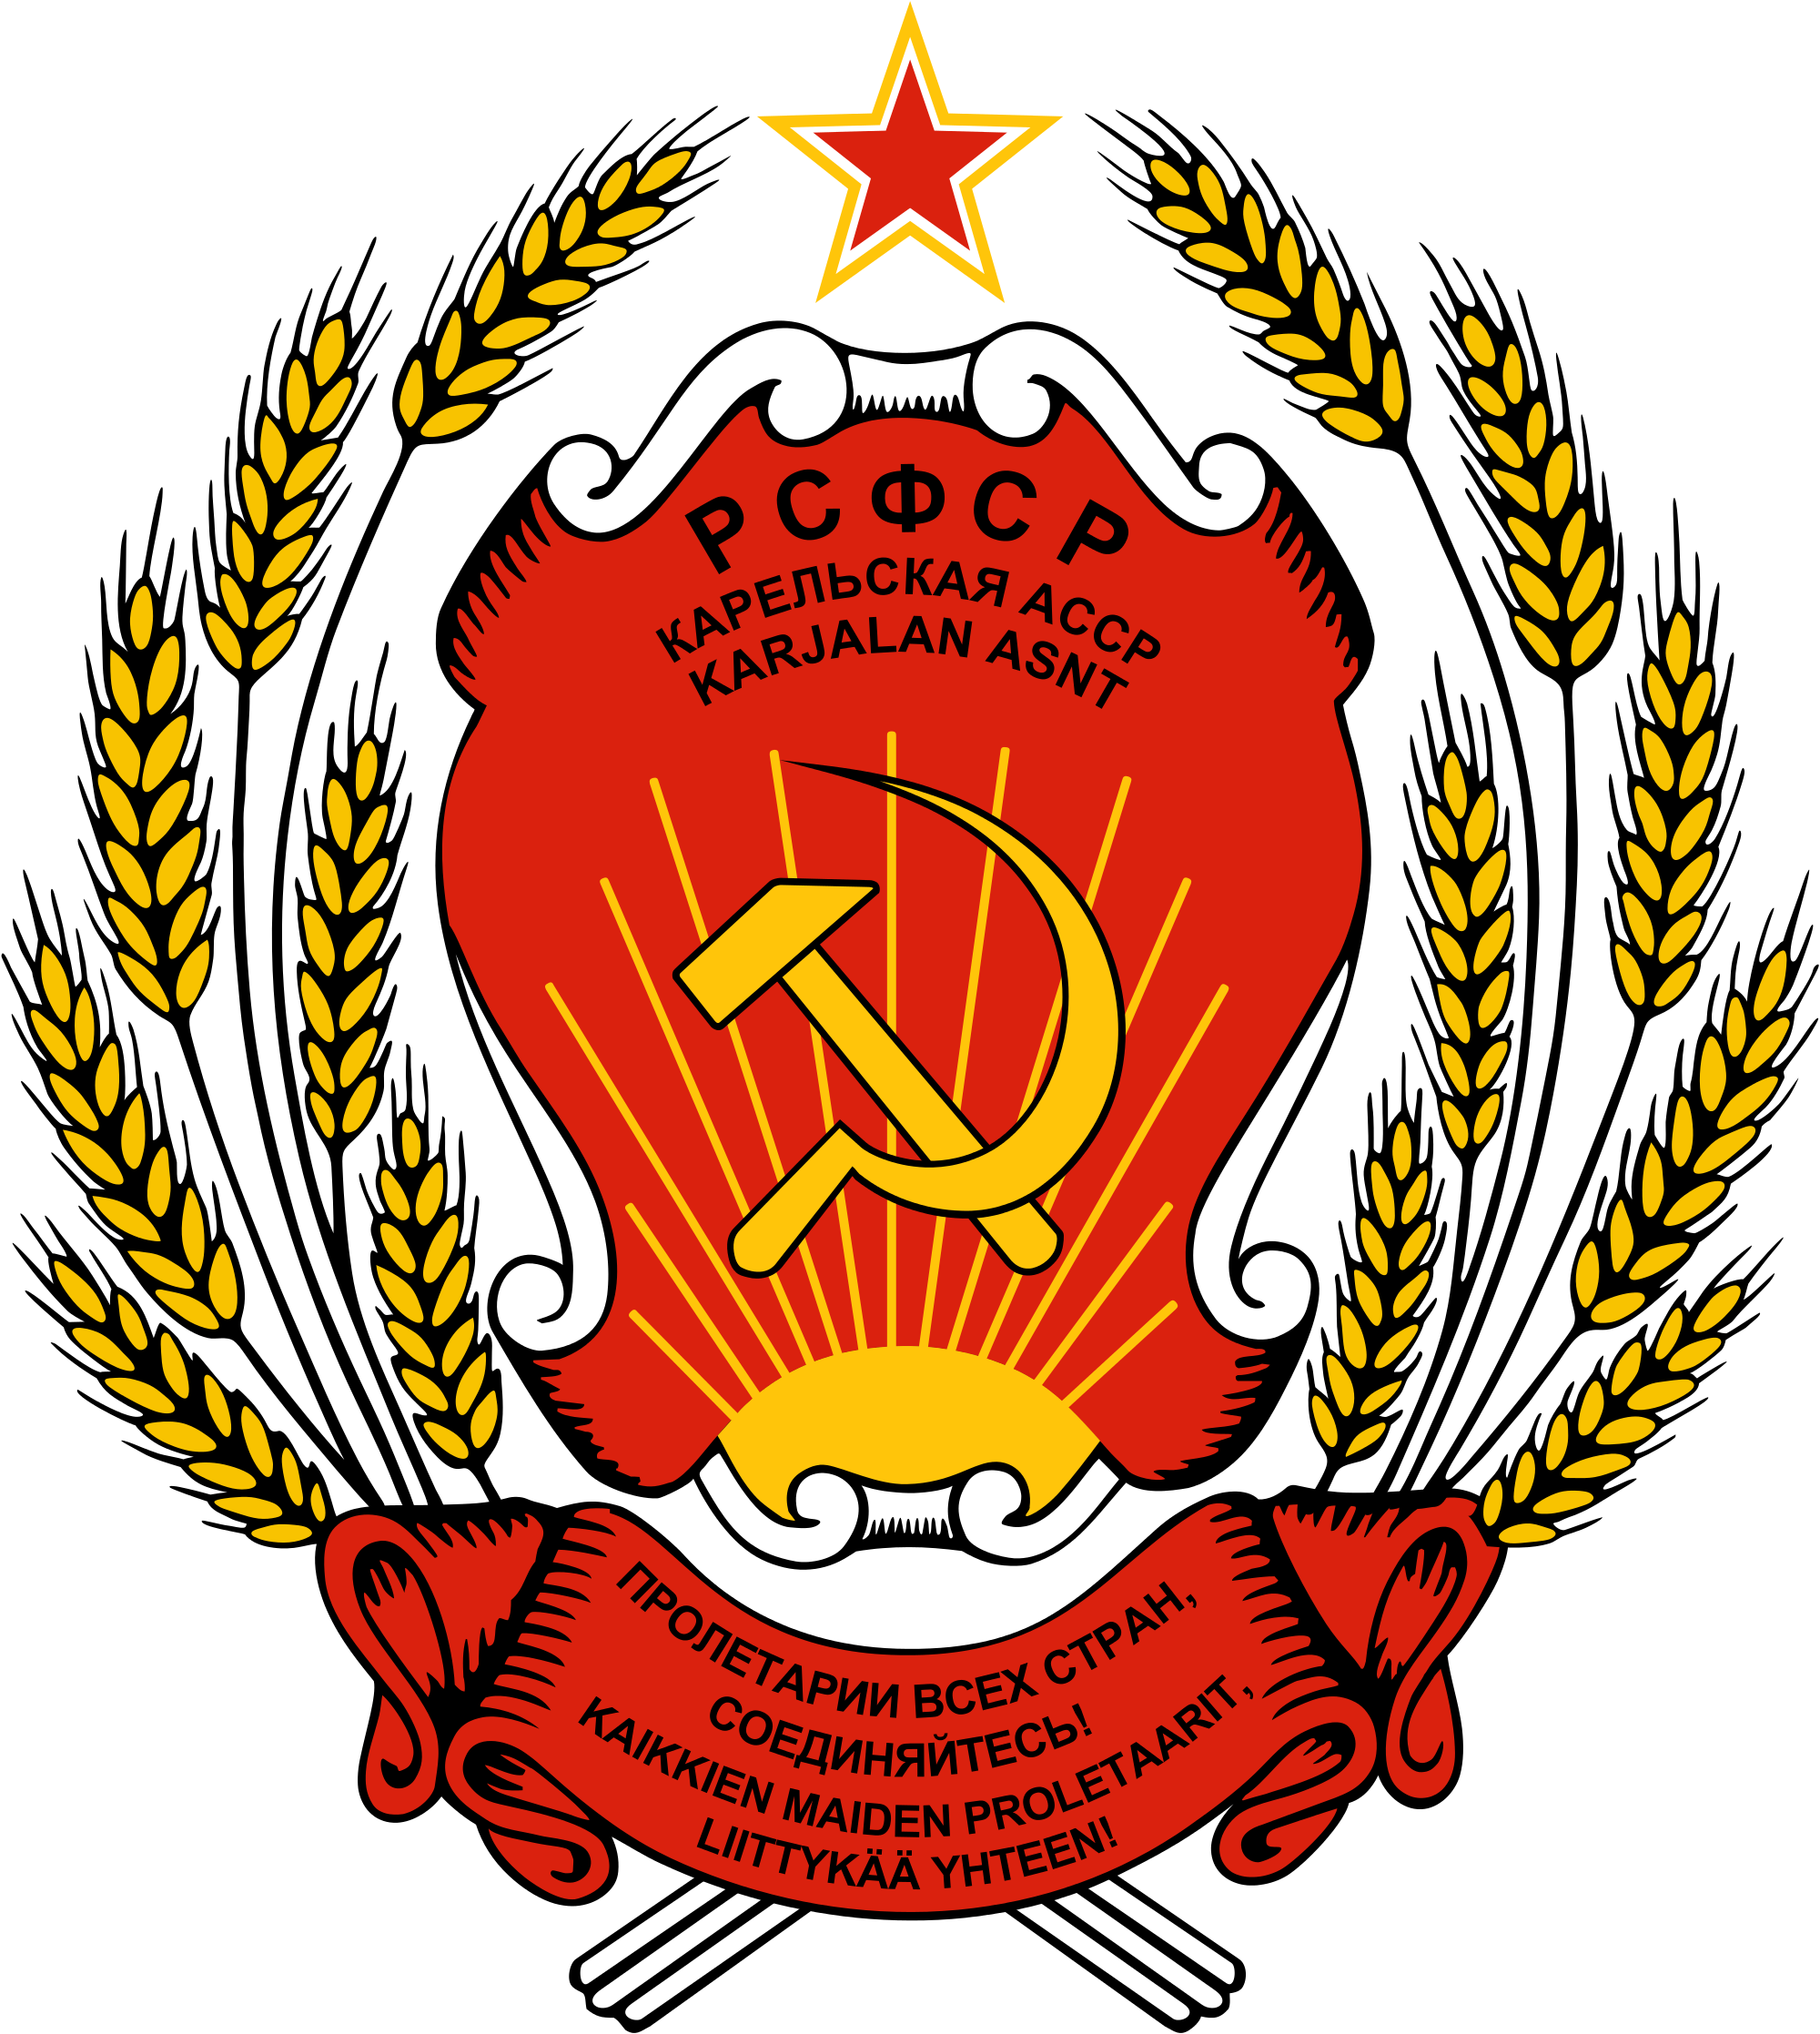 Soviet Union Cccp Images Karelia Assr Coat Of Arms - Russian Ssr Coat Of Arms , HD Wallpaper & Backgrounds